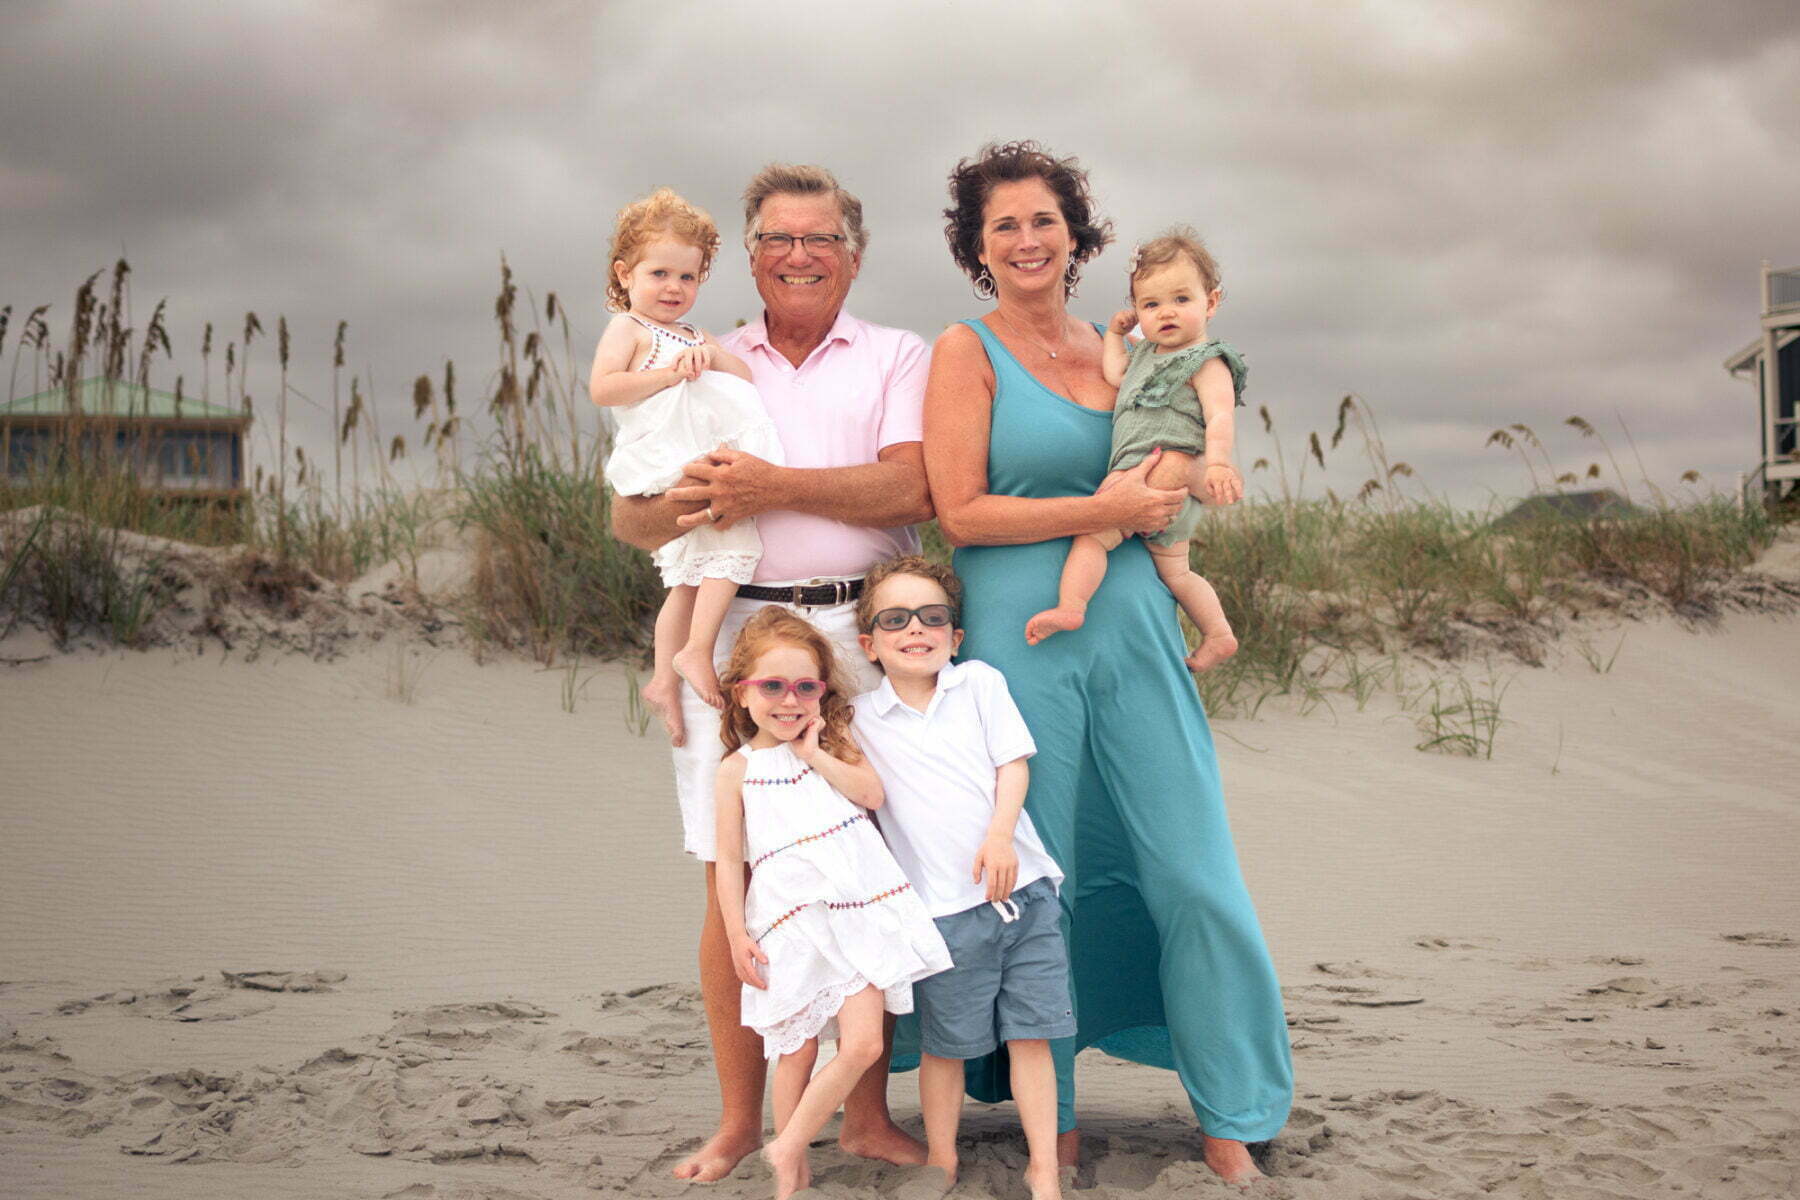 Professional family portrait photography Southport, NC.